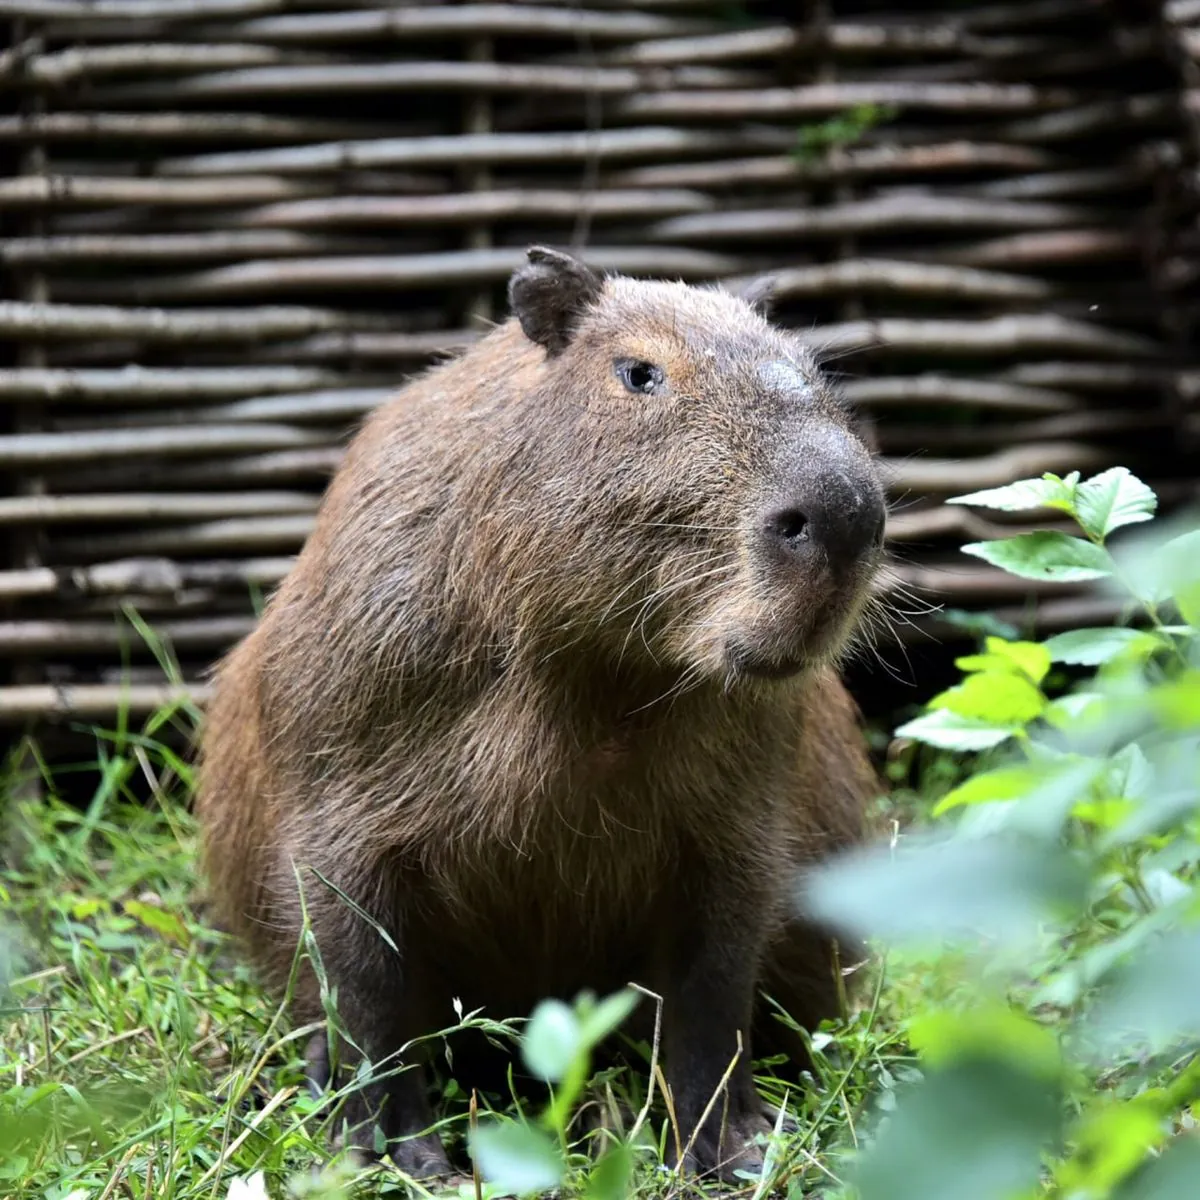 Rescued from shelling capybara Tohu was treated and released into the open enclosure of the Kyiv Zoo